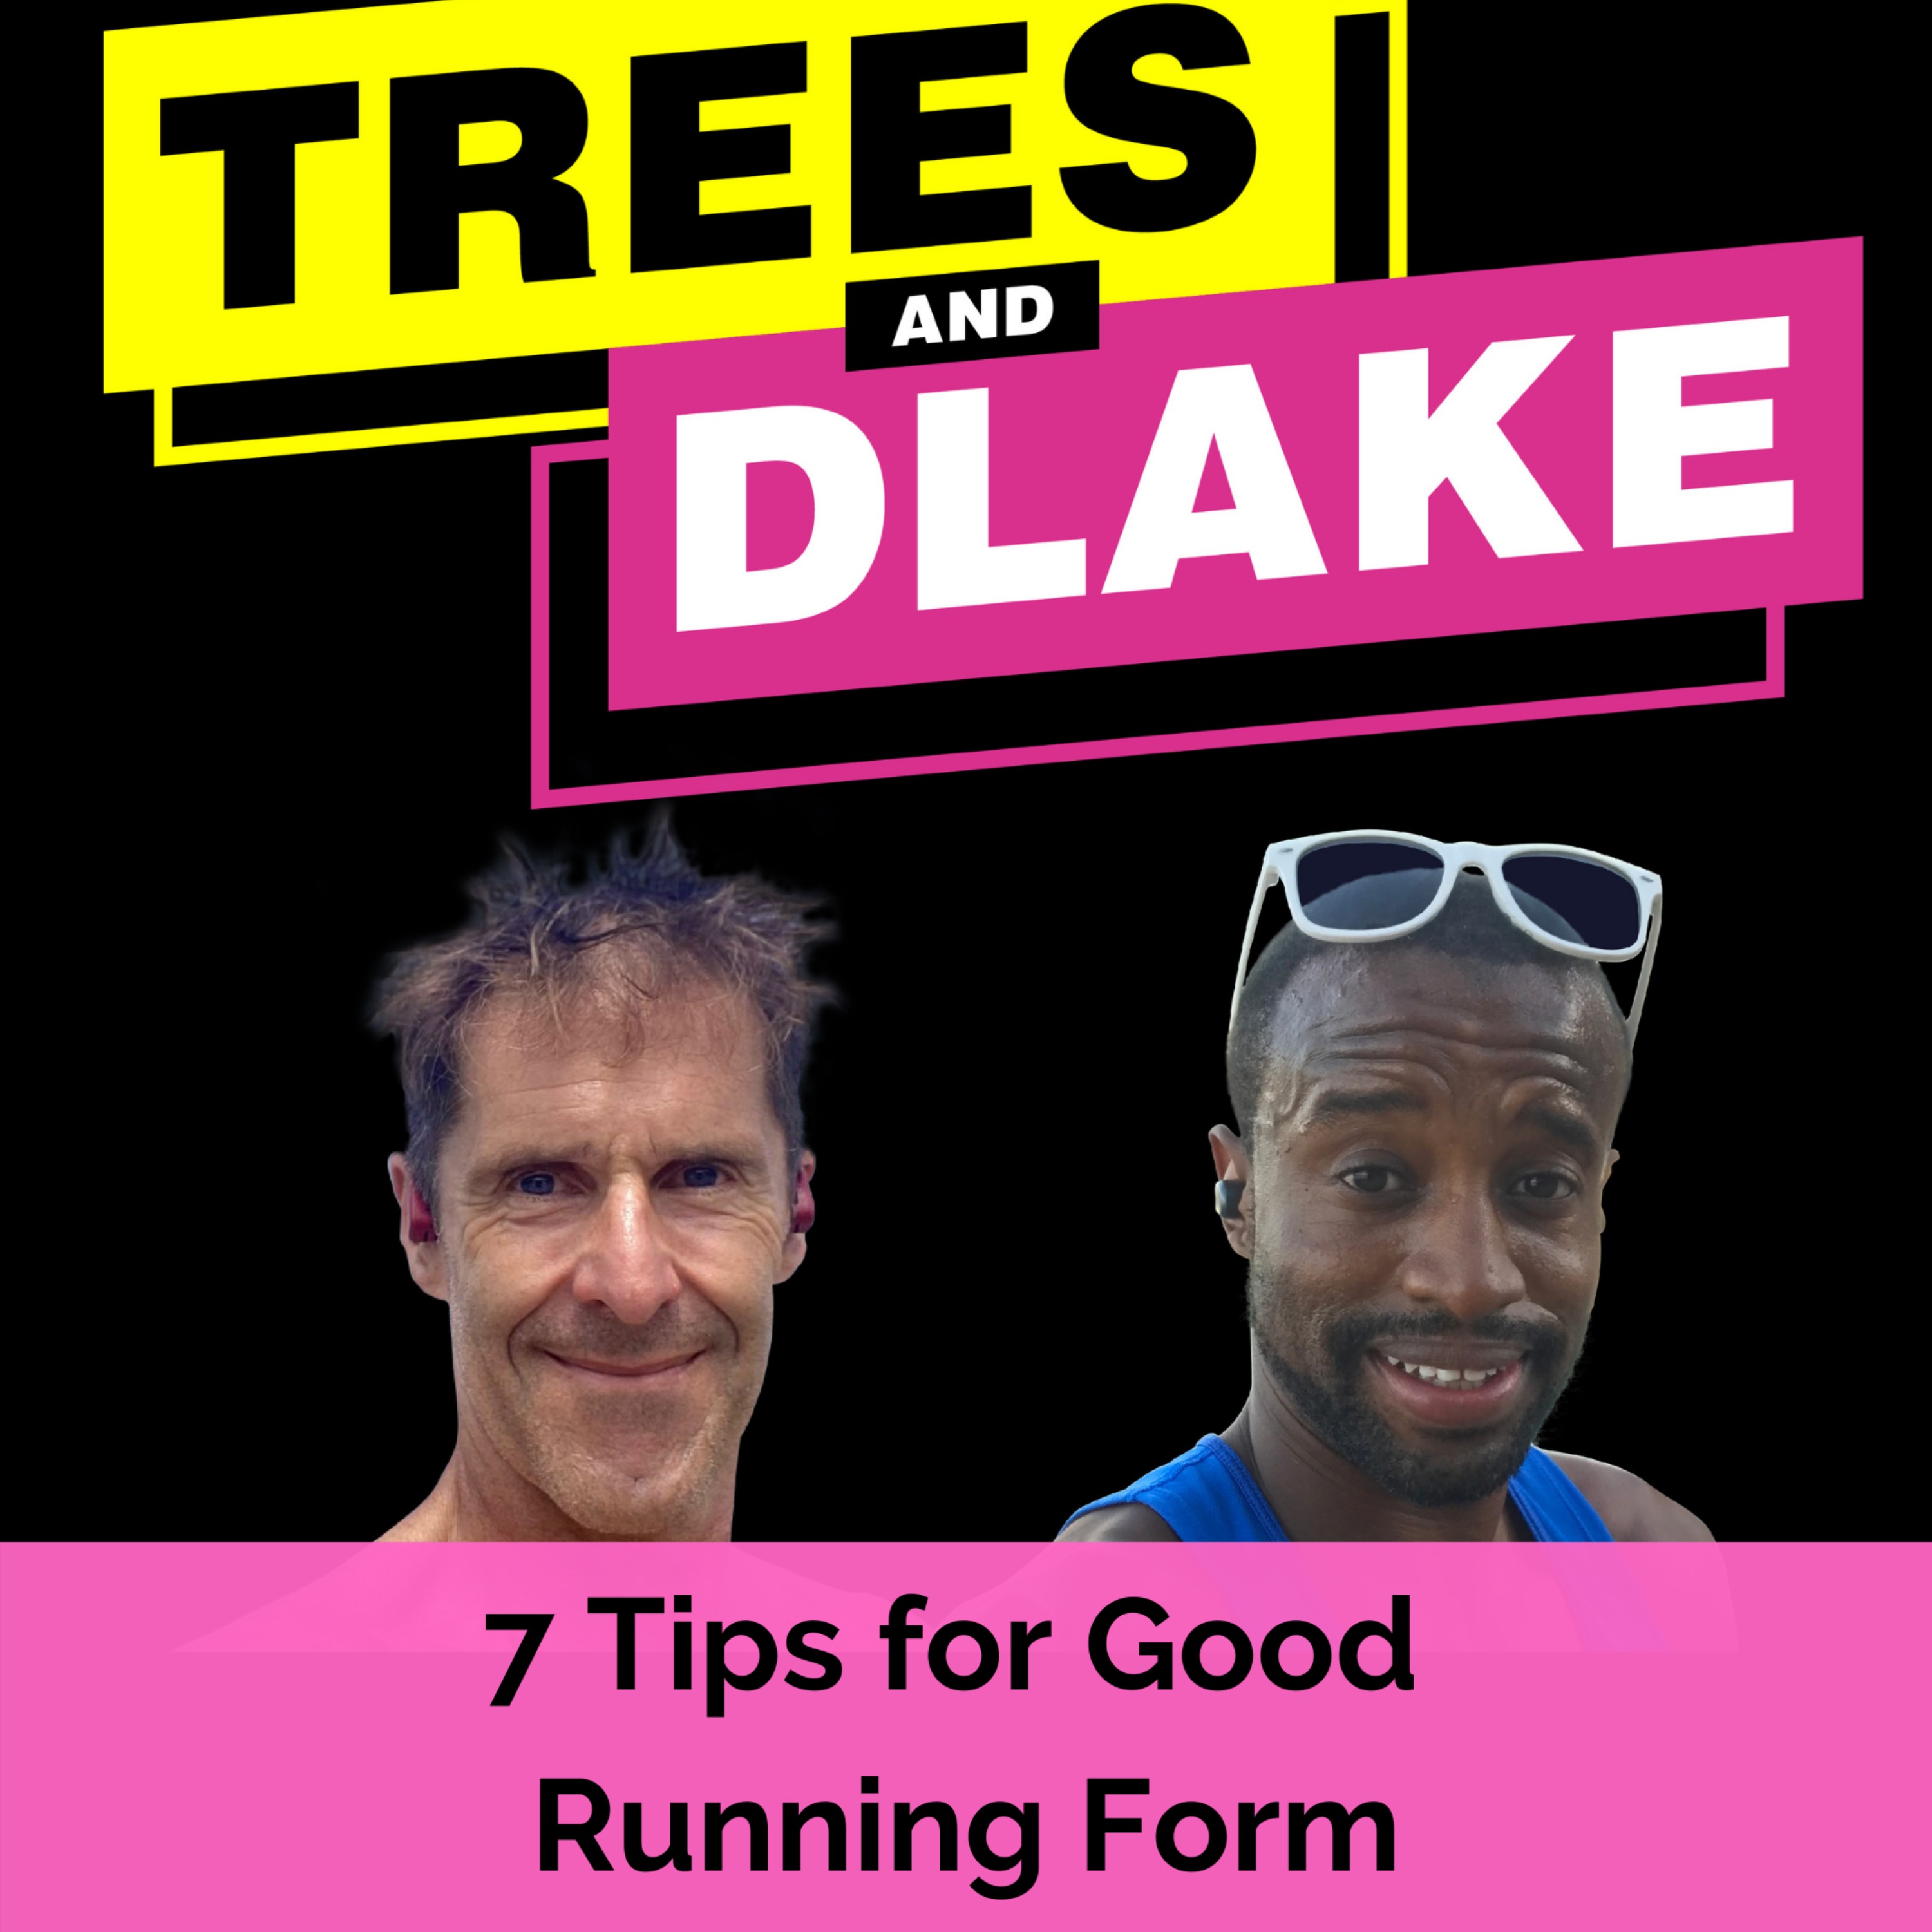 The Top 7 Tips For Good Running Form